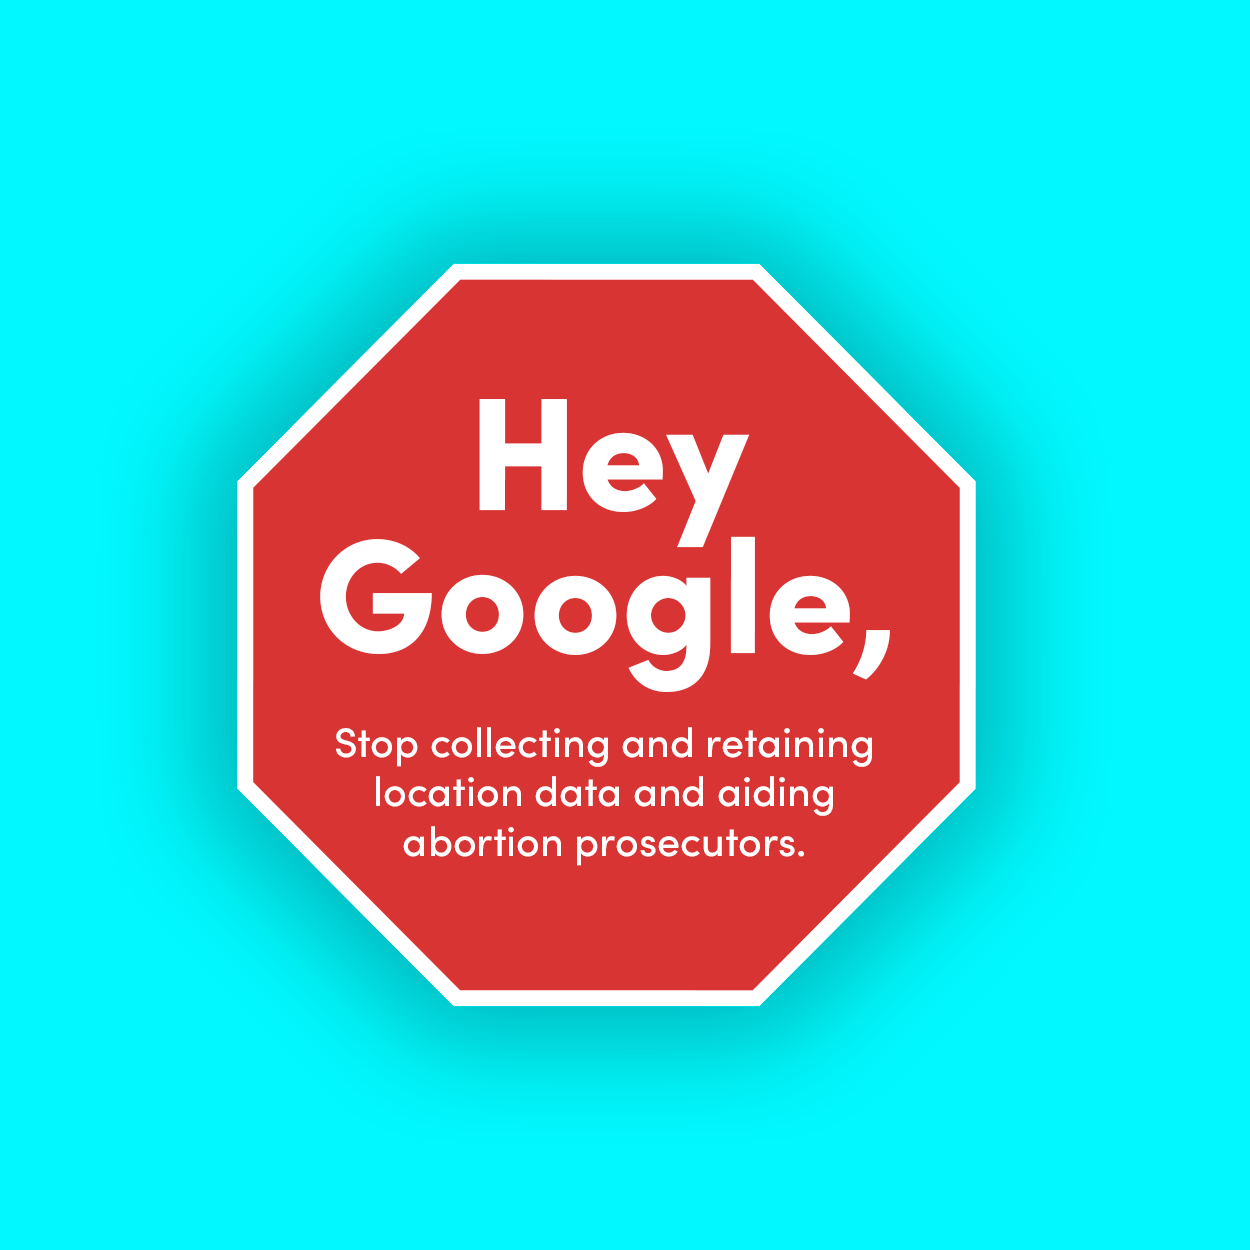 Tell Google to Delete Users’ Location Data